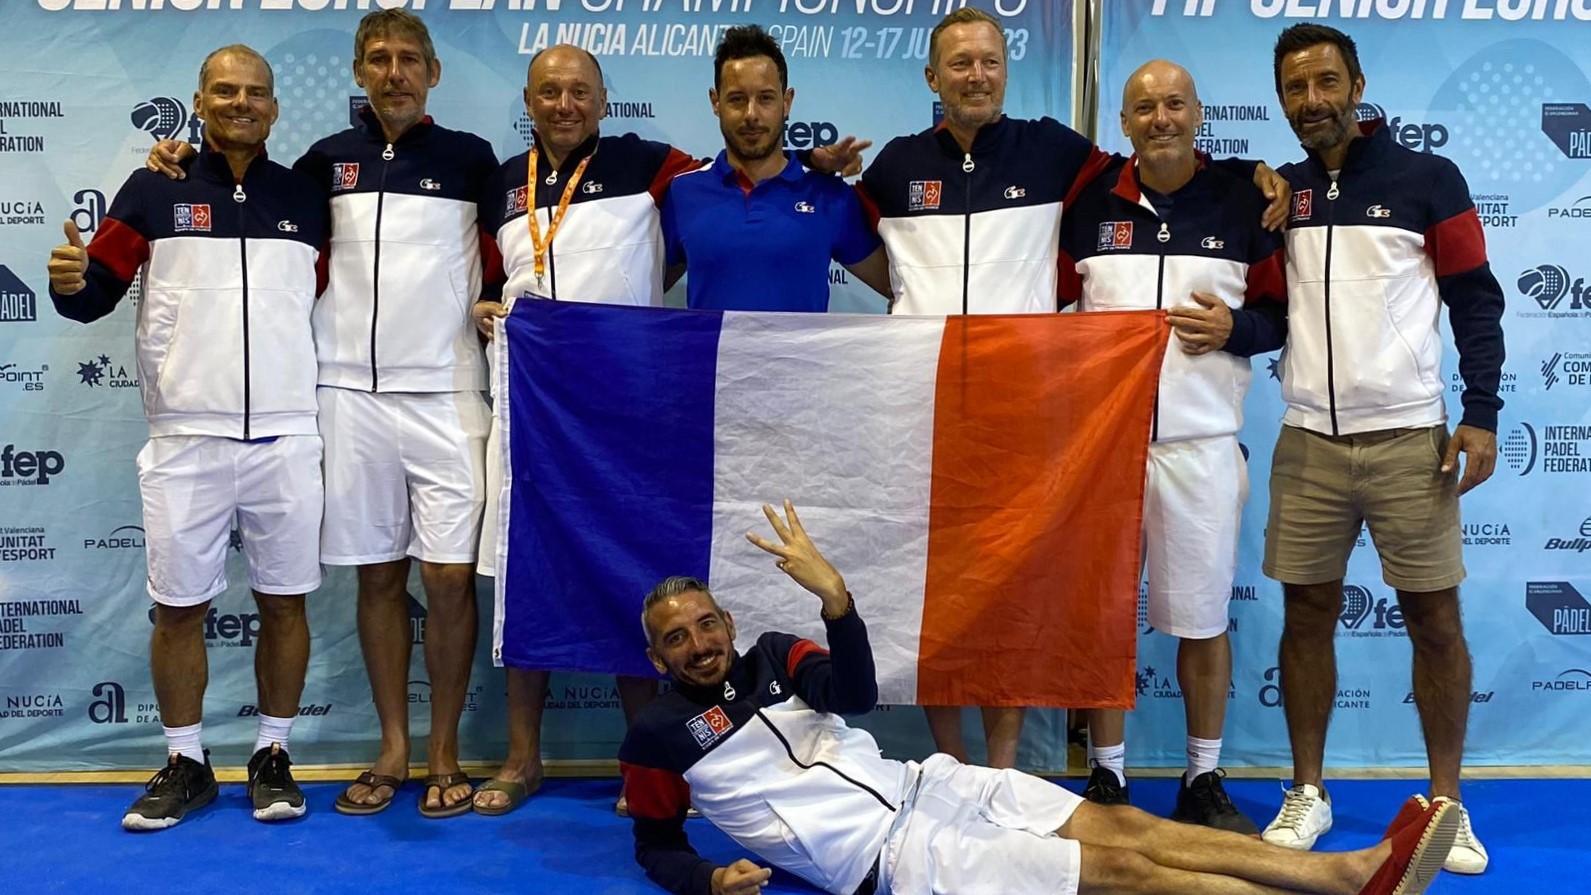 Euro Seniors + 2023 – The French take 3rd place!